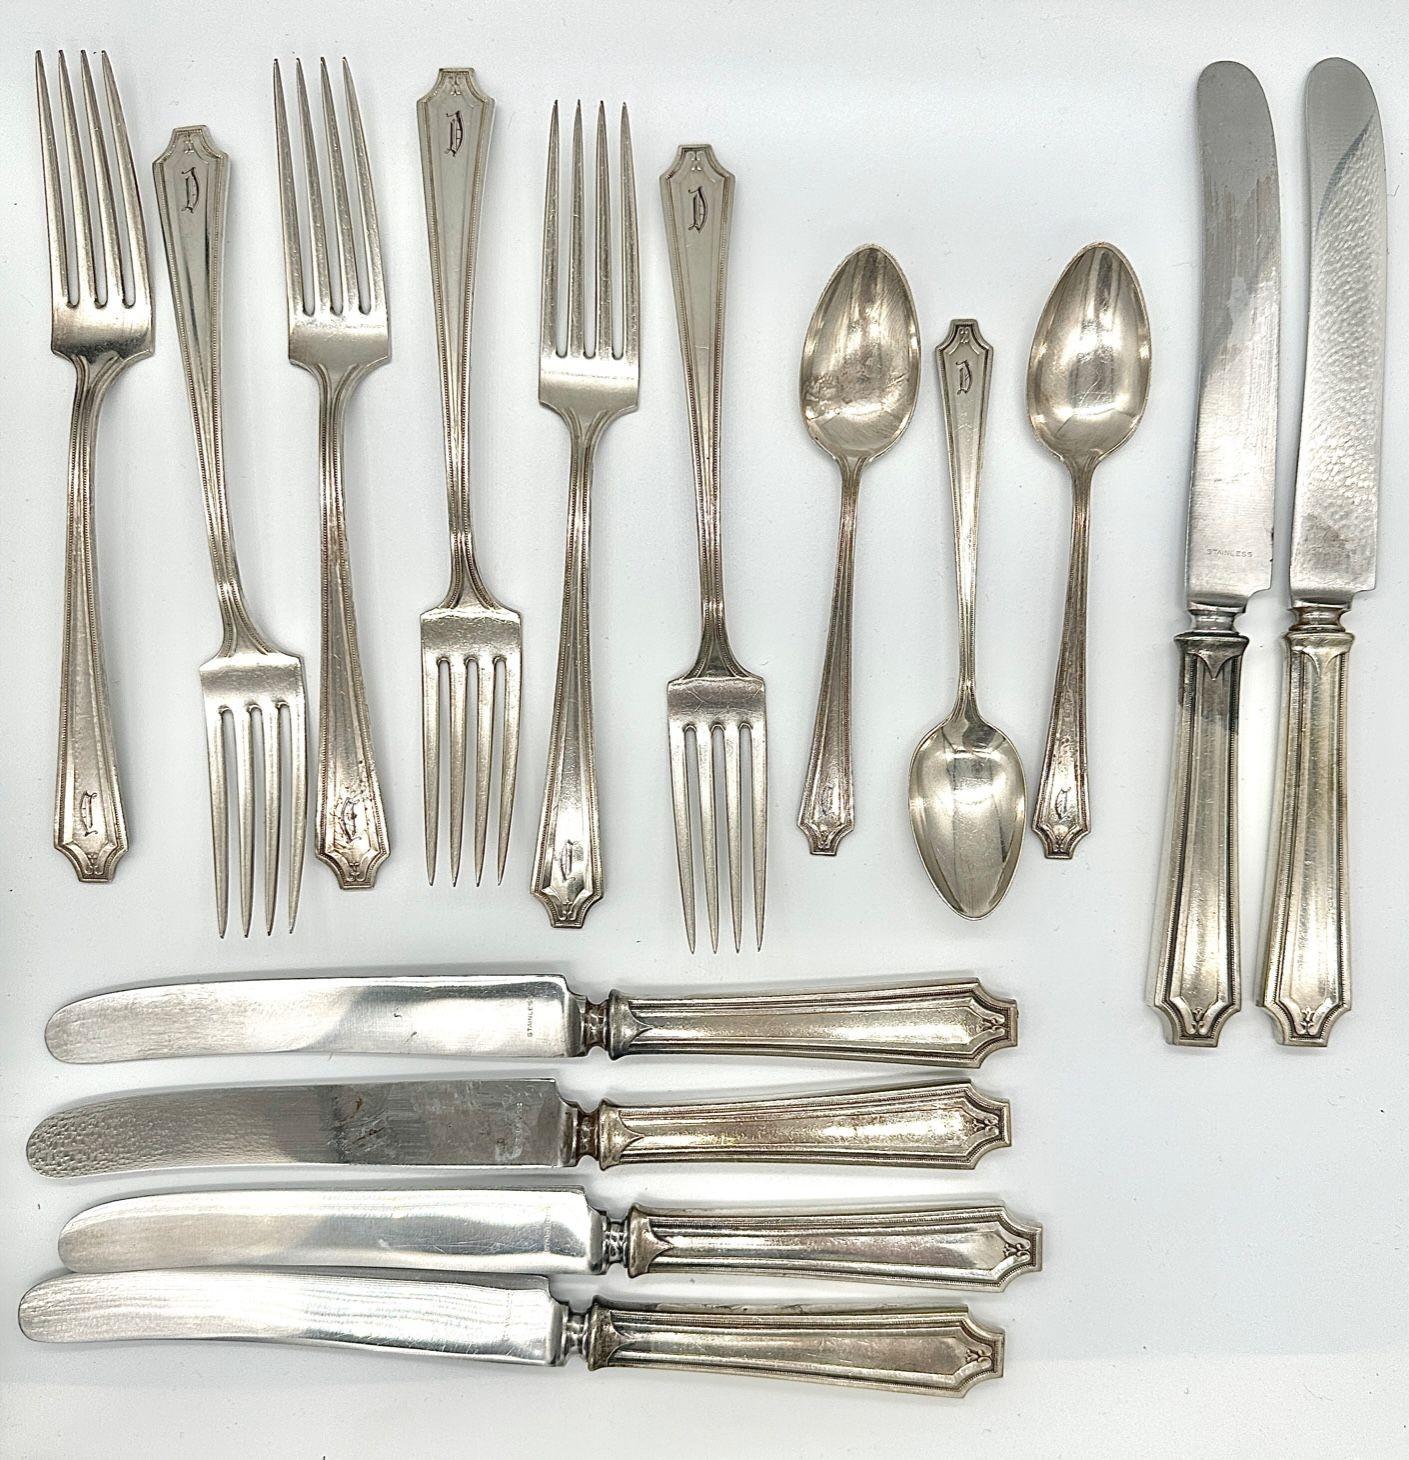 Whiting Manufacturing Co, born in 1840 as Tifft & Whiting, evolved and moved to New York after a fire in 1875. Gorham acquired it in 1924, known for superb handmade silverware. Charles Osborne, a notable designer, left his mark on the American